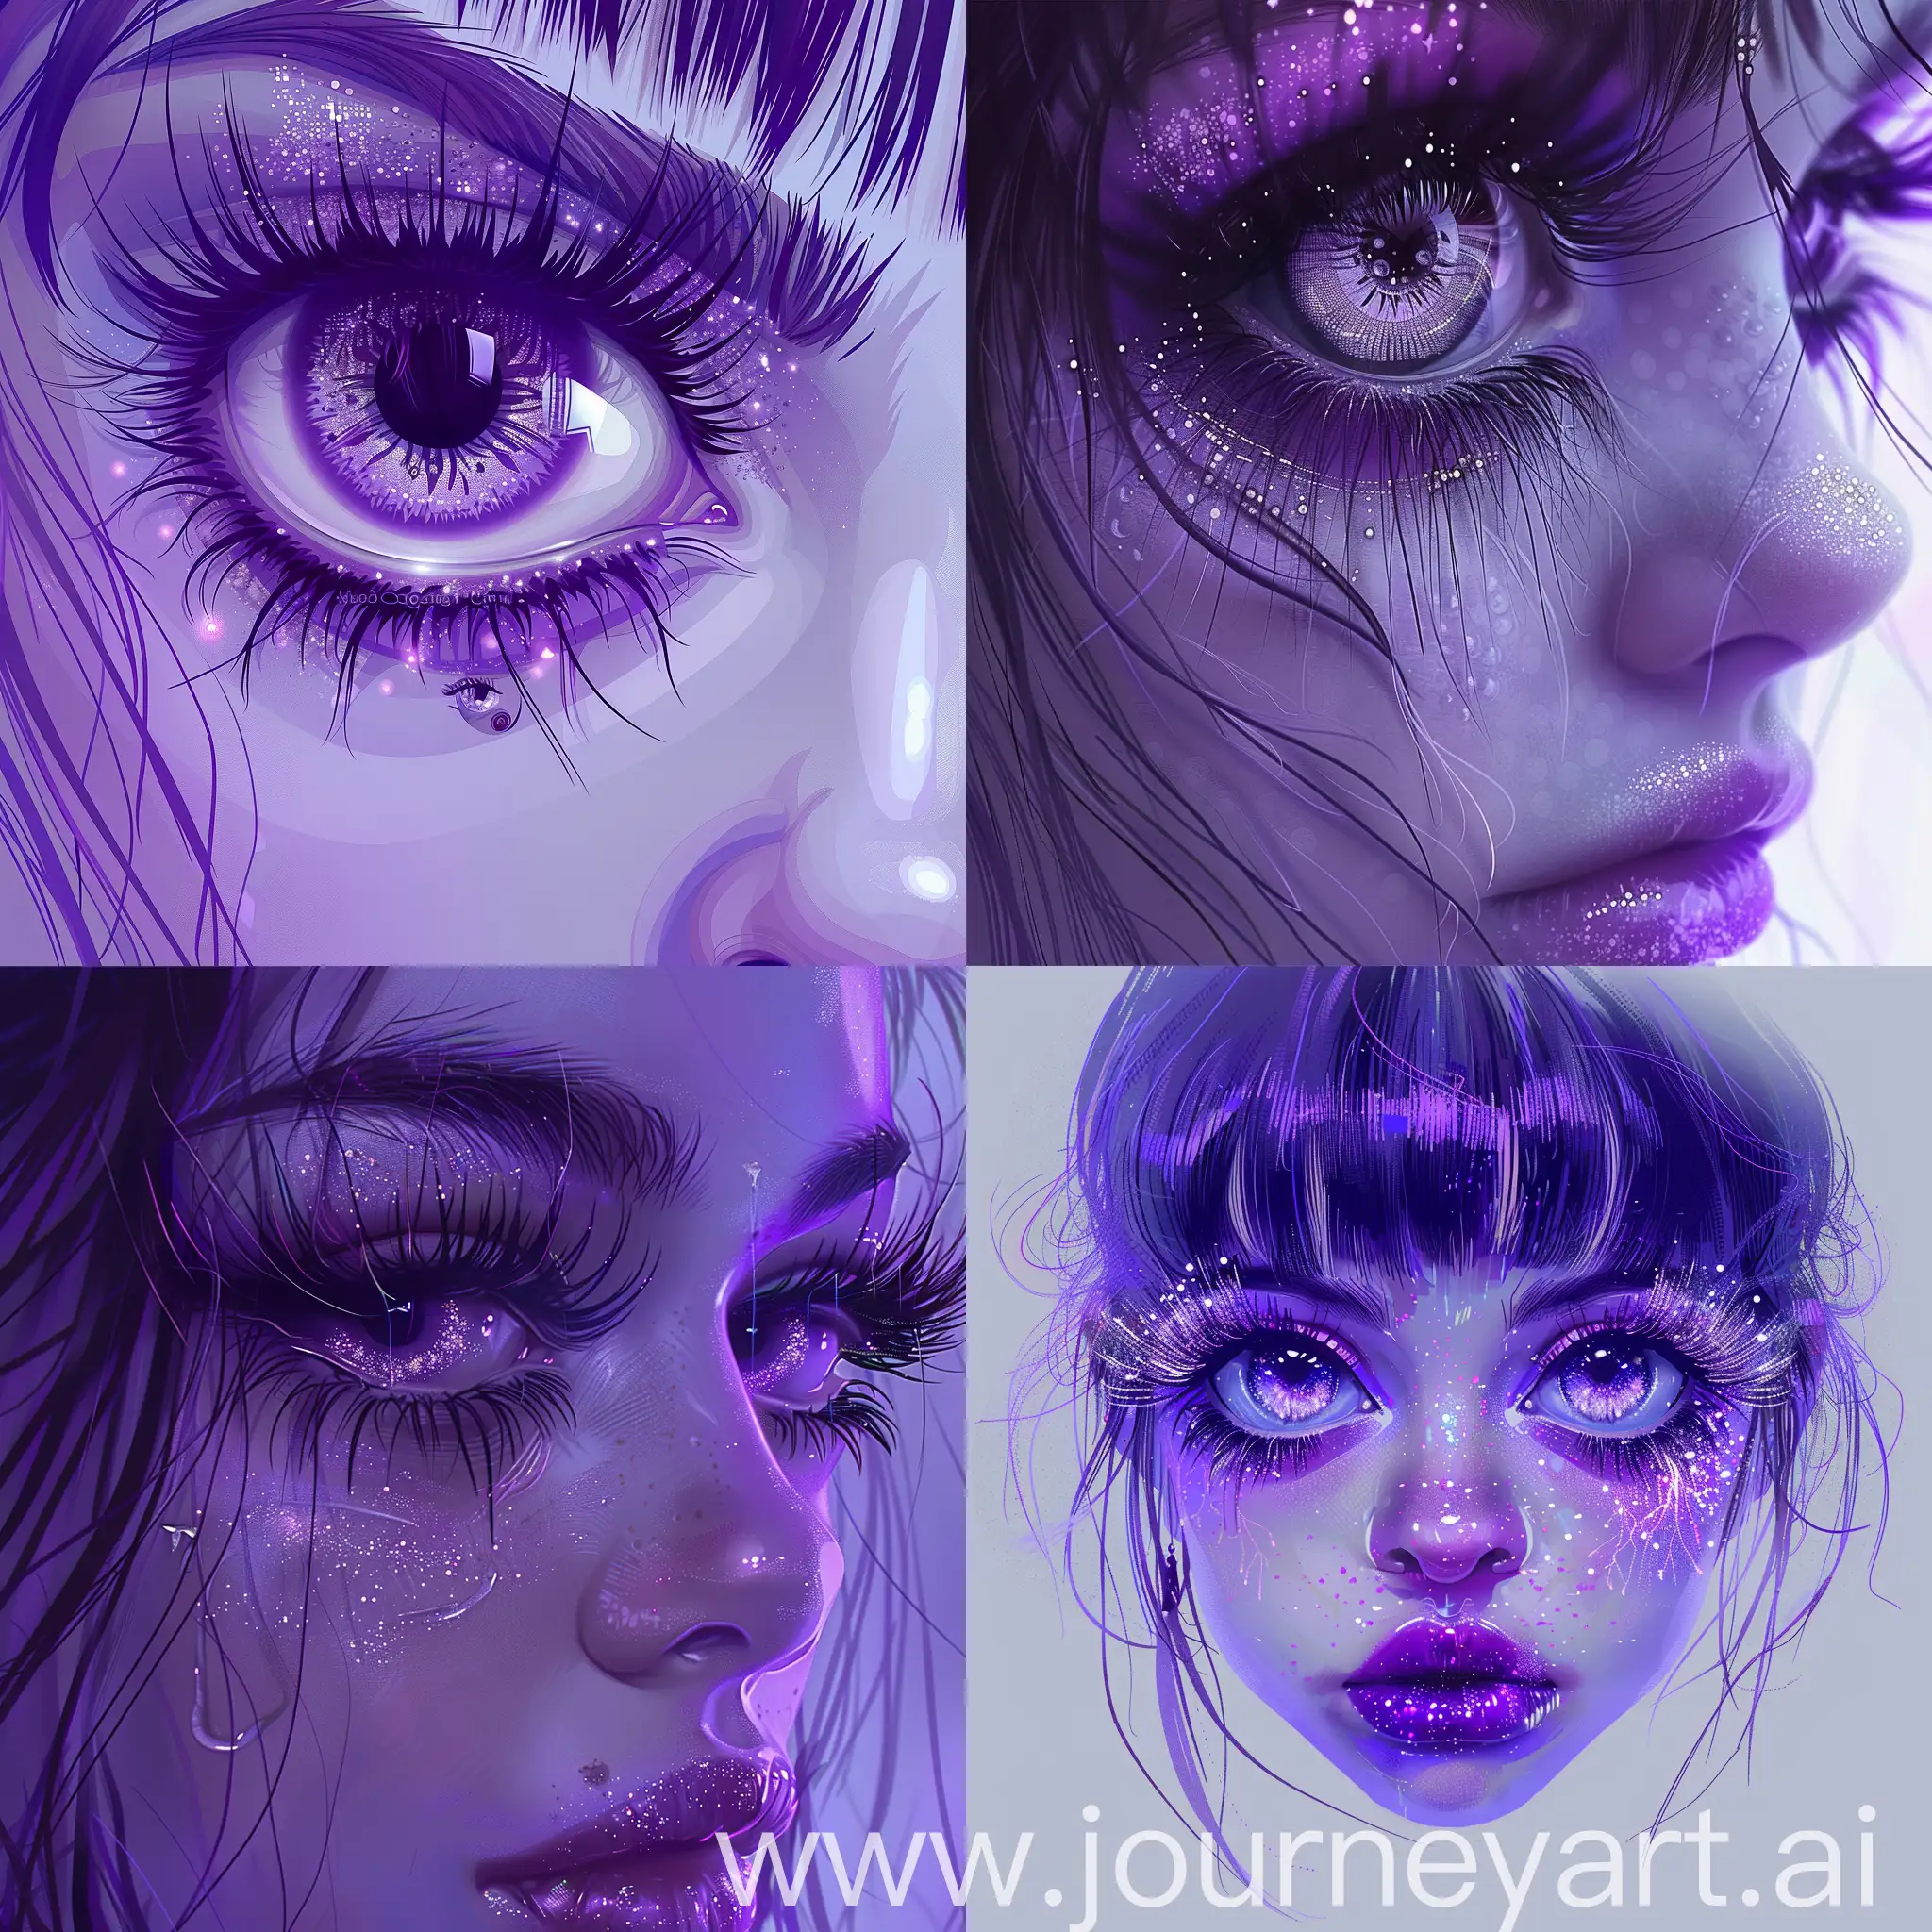 Gothic-Realistic-Girl-with-Big-Eyes-and-Mystical-Purple-Gaze